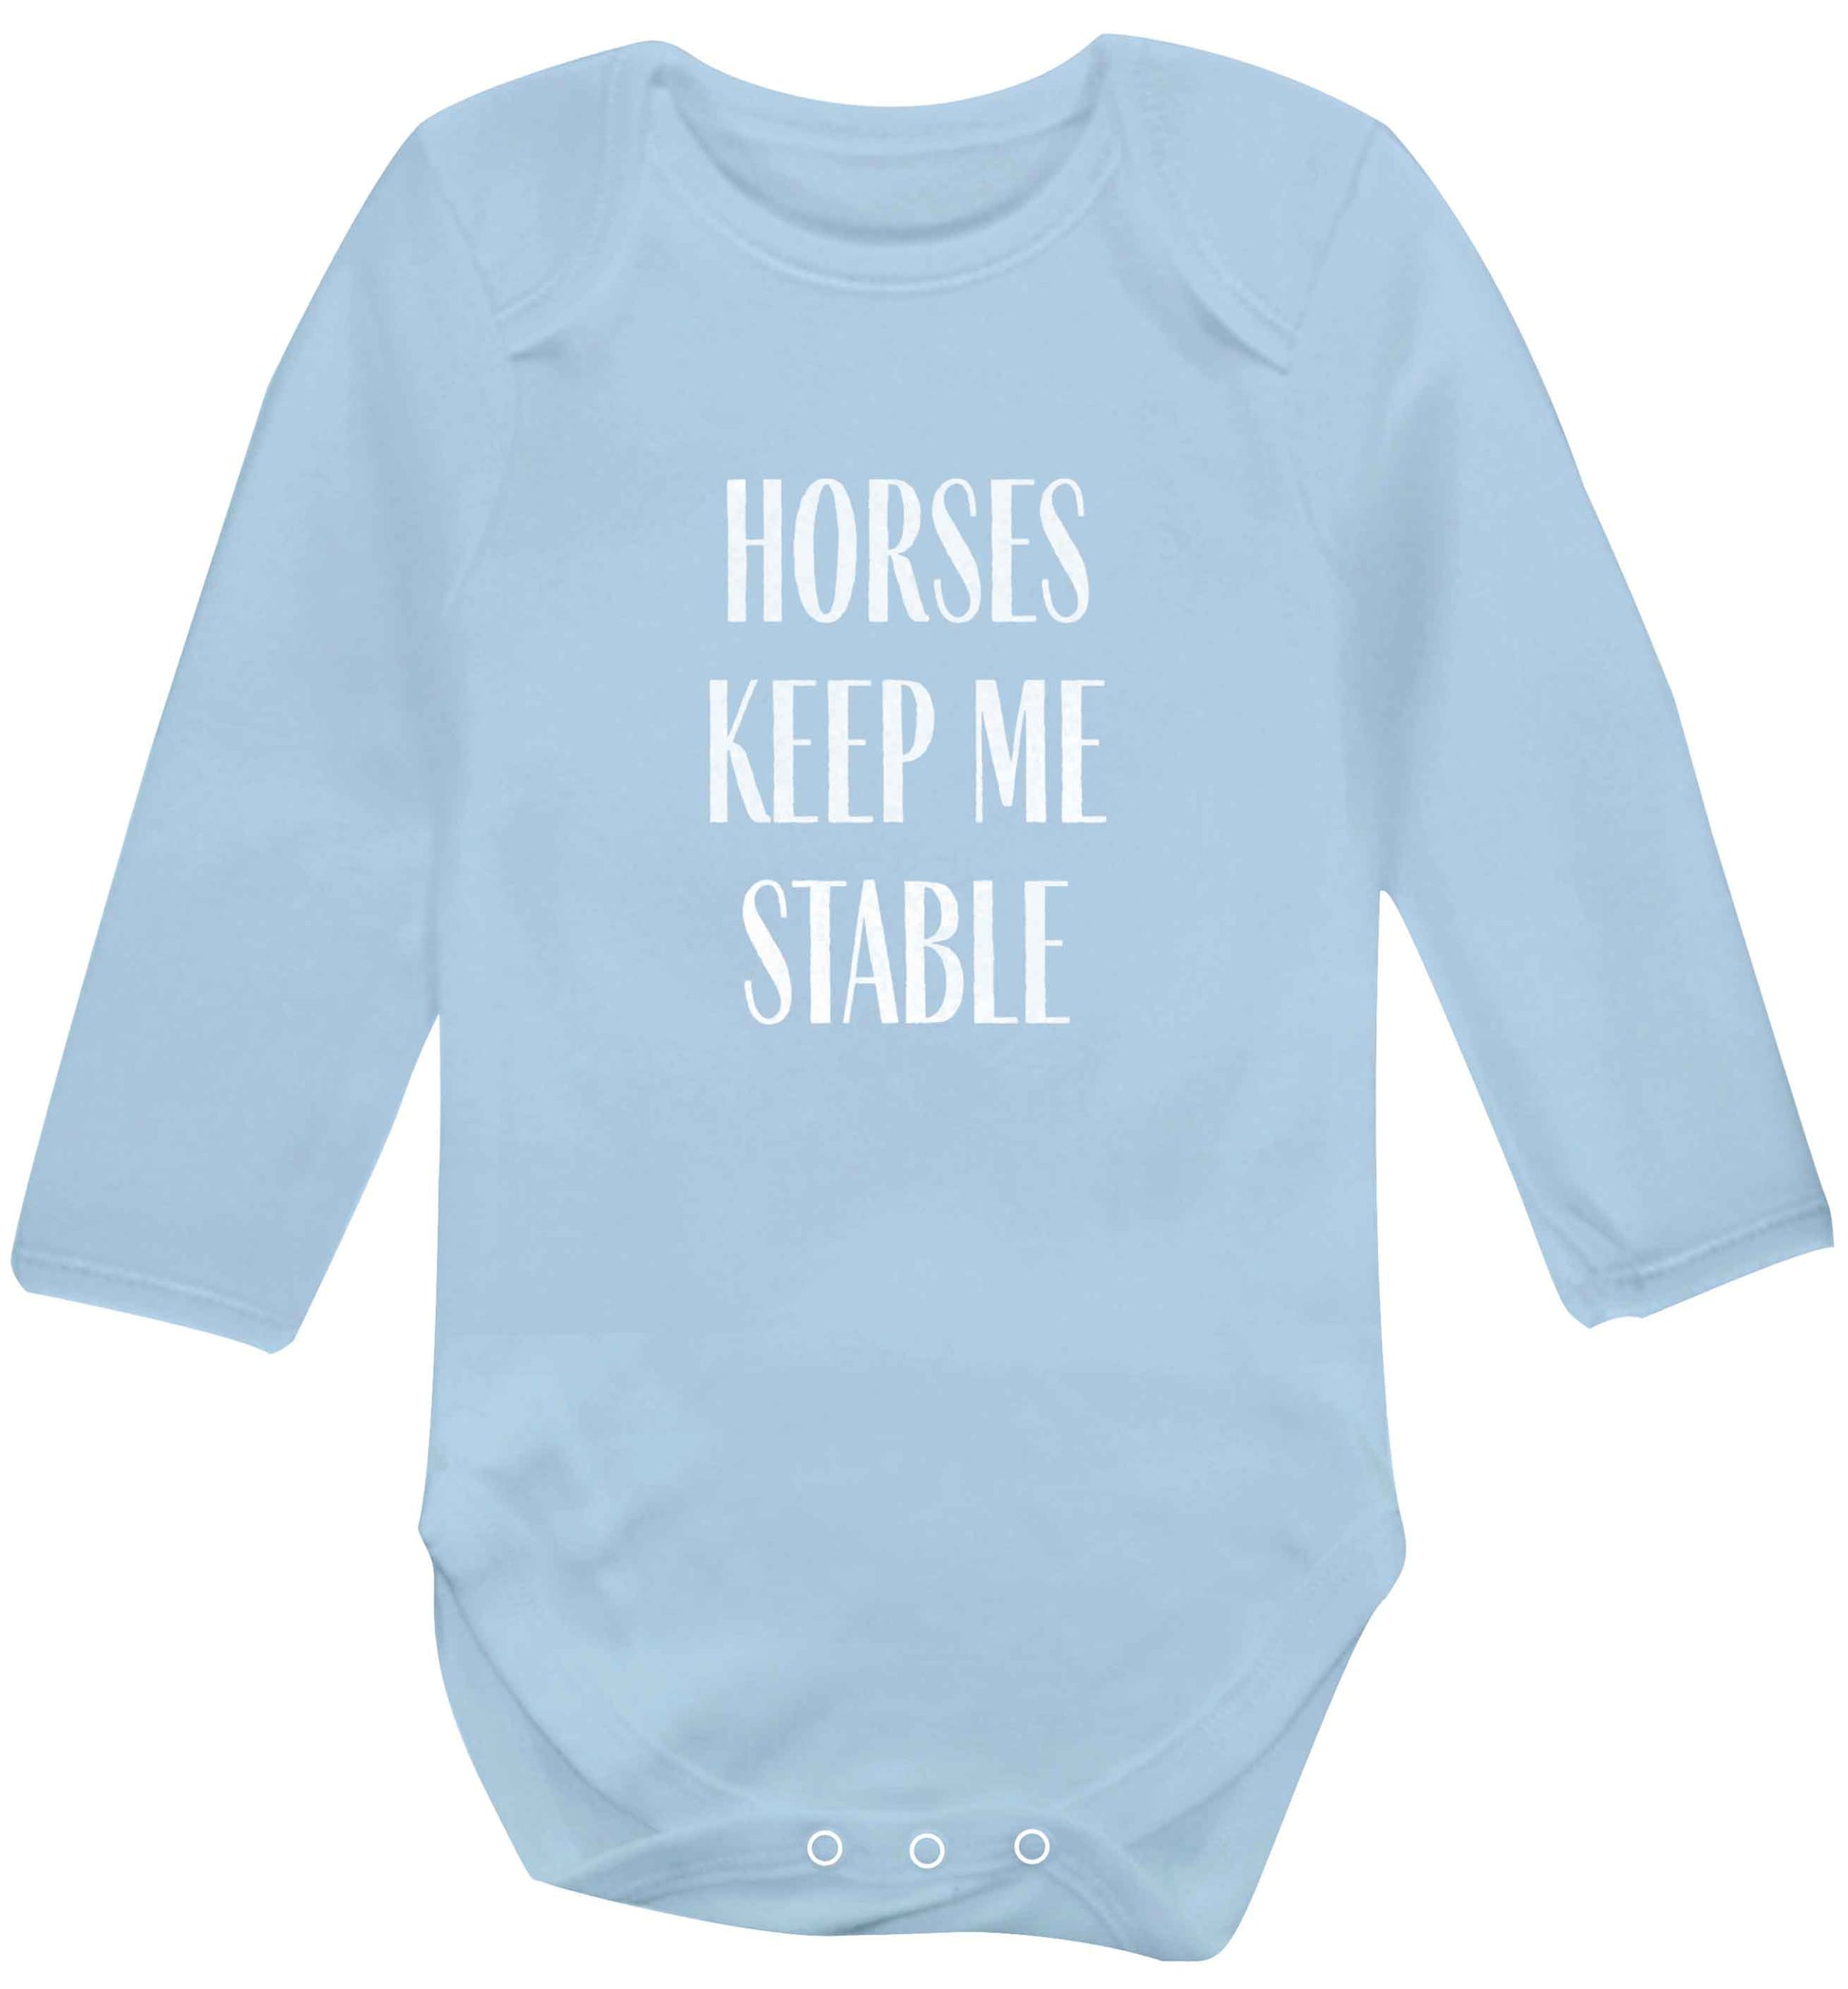 Horses keep me stable baby vest long sleeved pale blue 6-12 months